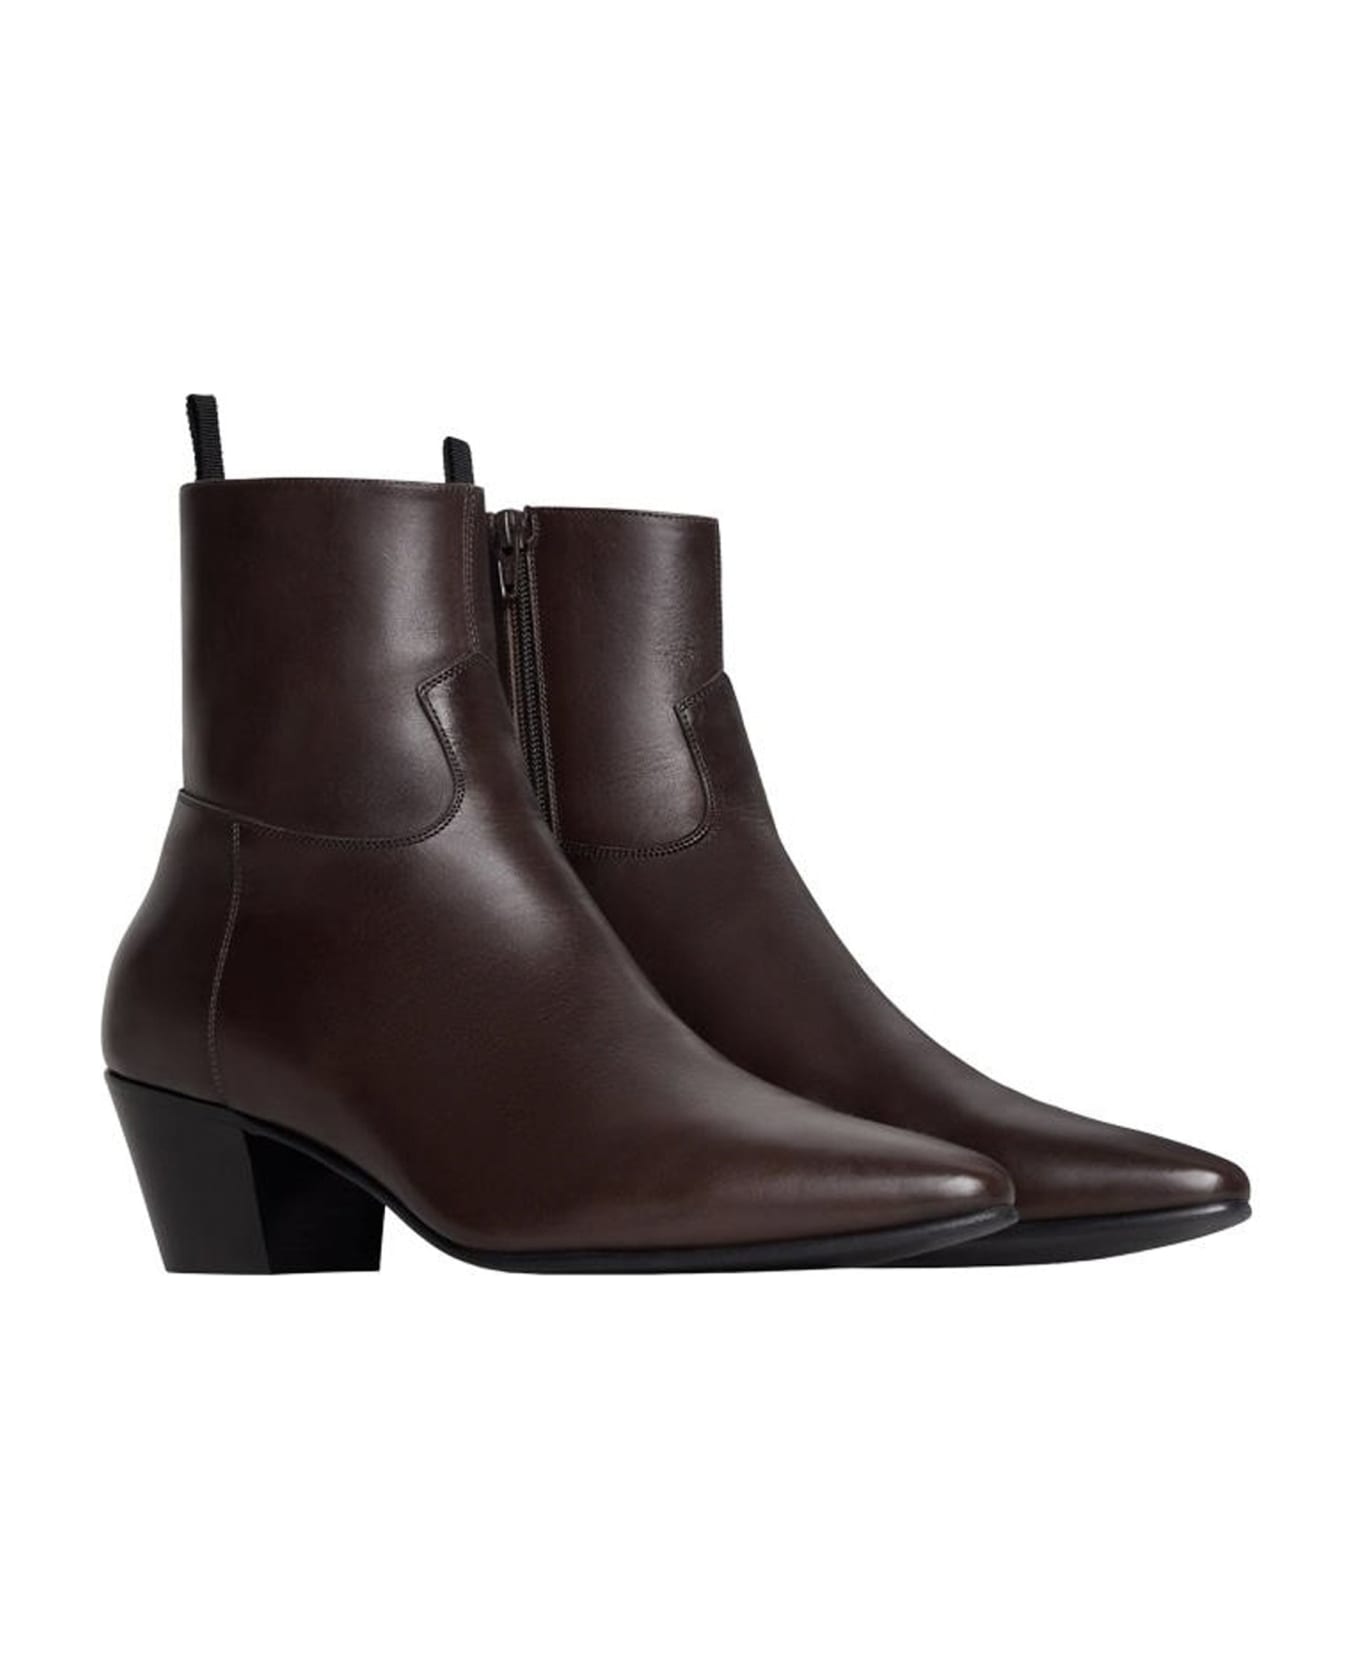 Celine Leather Boots - Brown